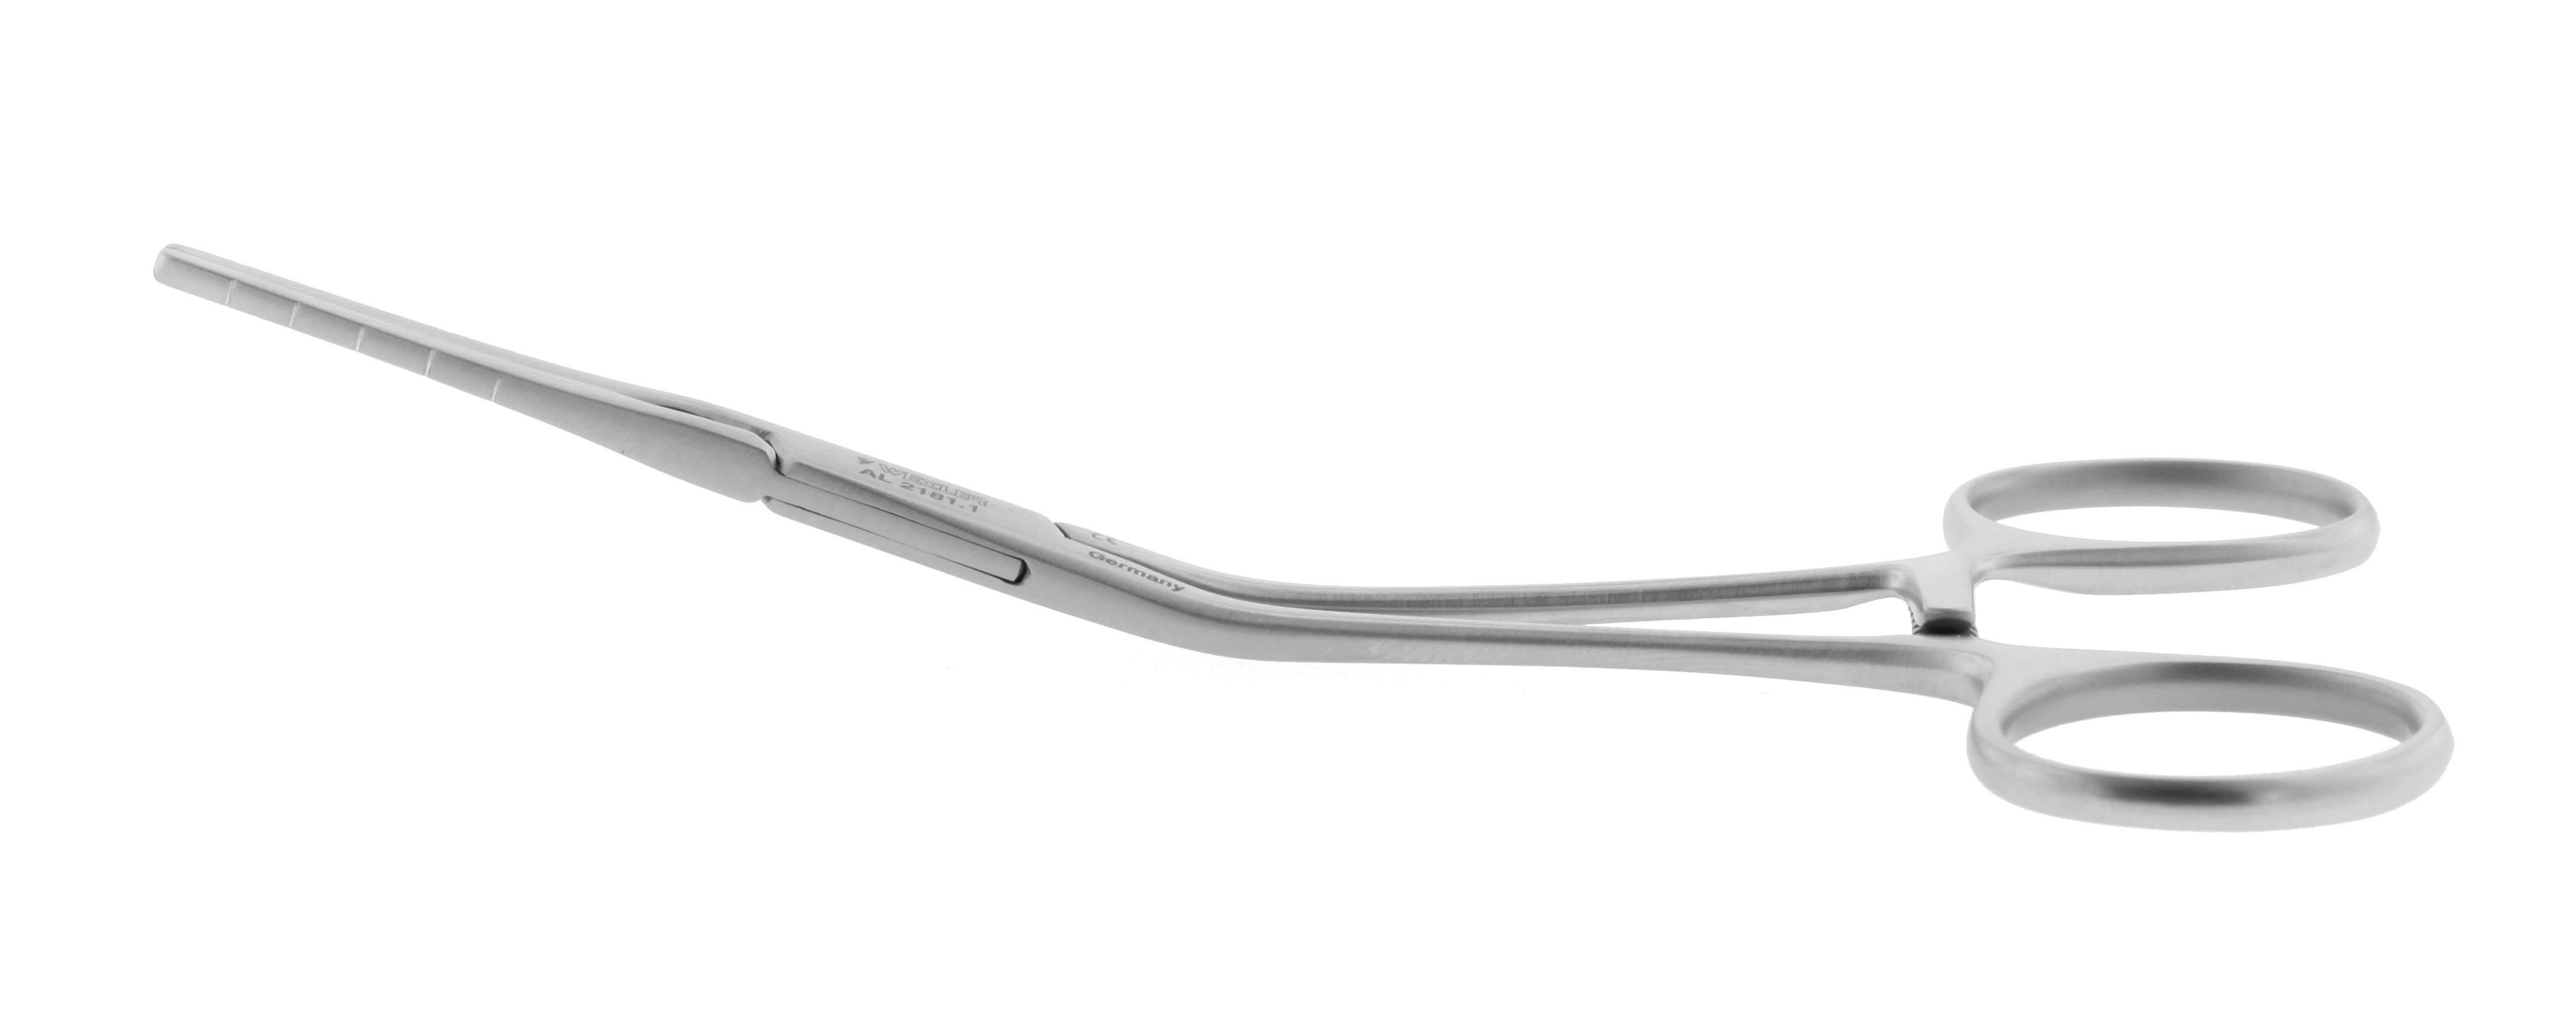 Cooley Pediatric Clamp - 30mm straight Cooley Atraumatic jaws